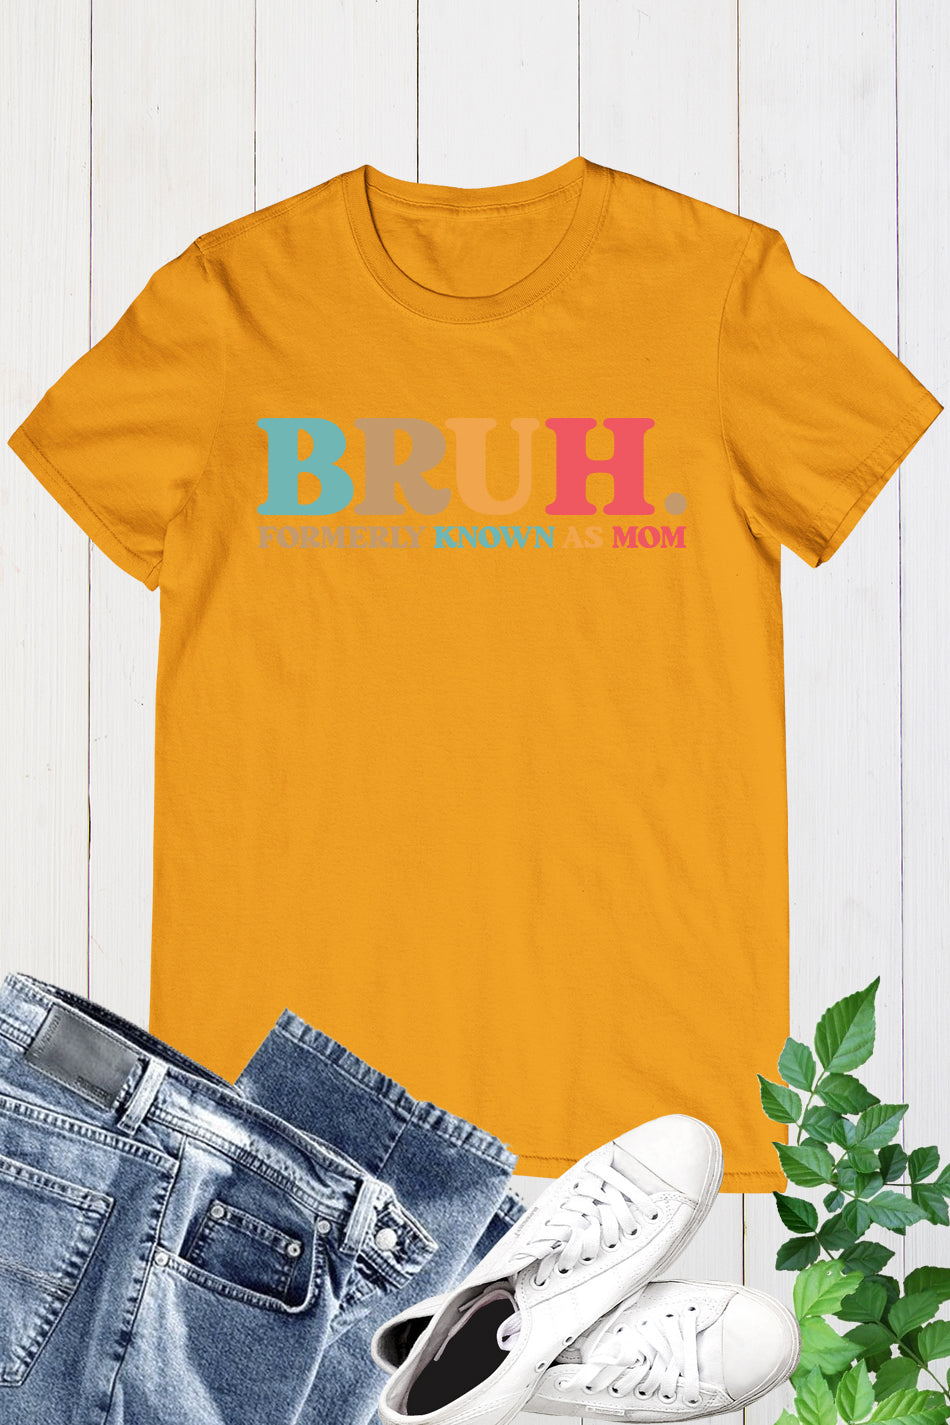 Bruh Formerly known as Mom Shirts